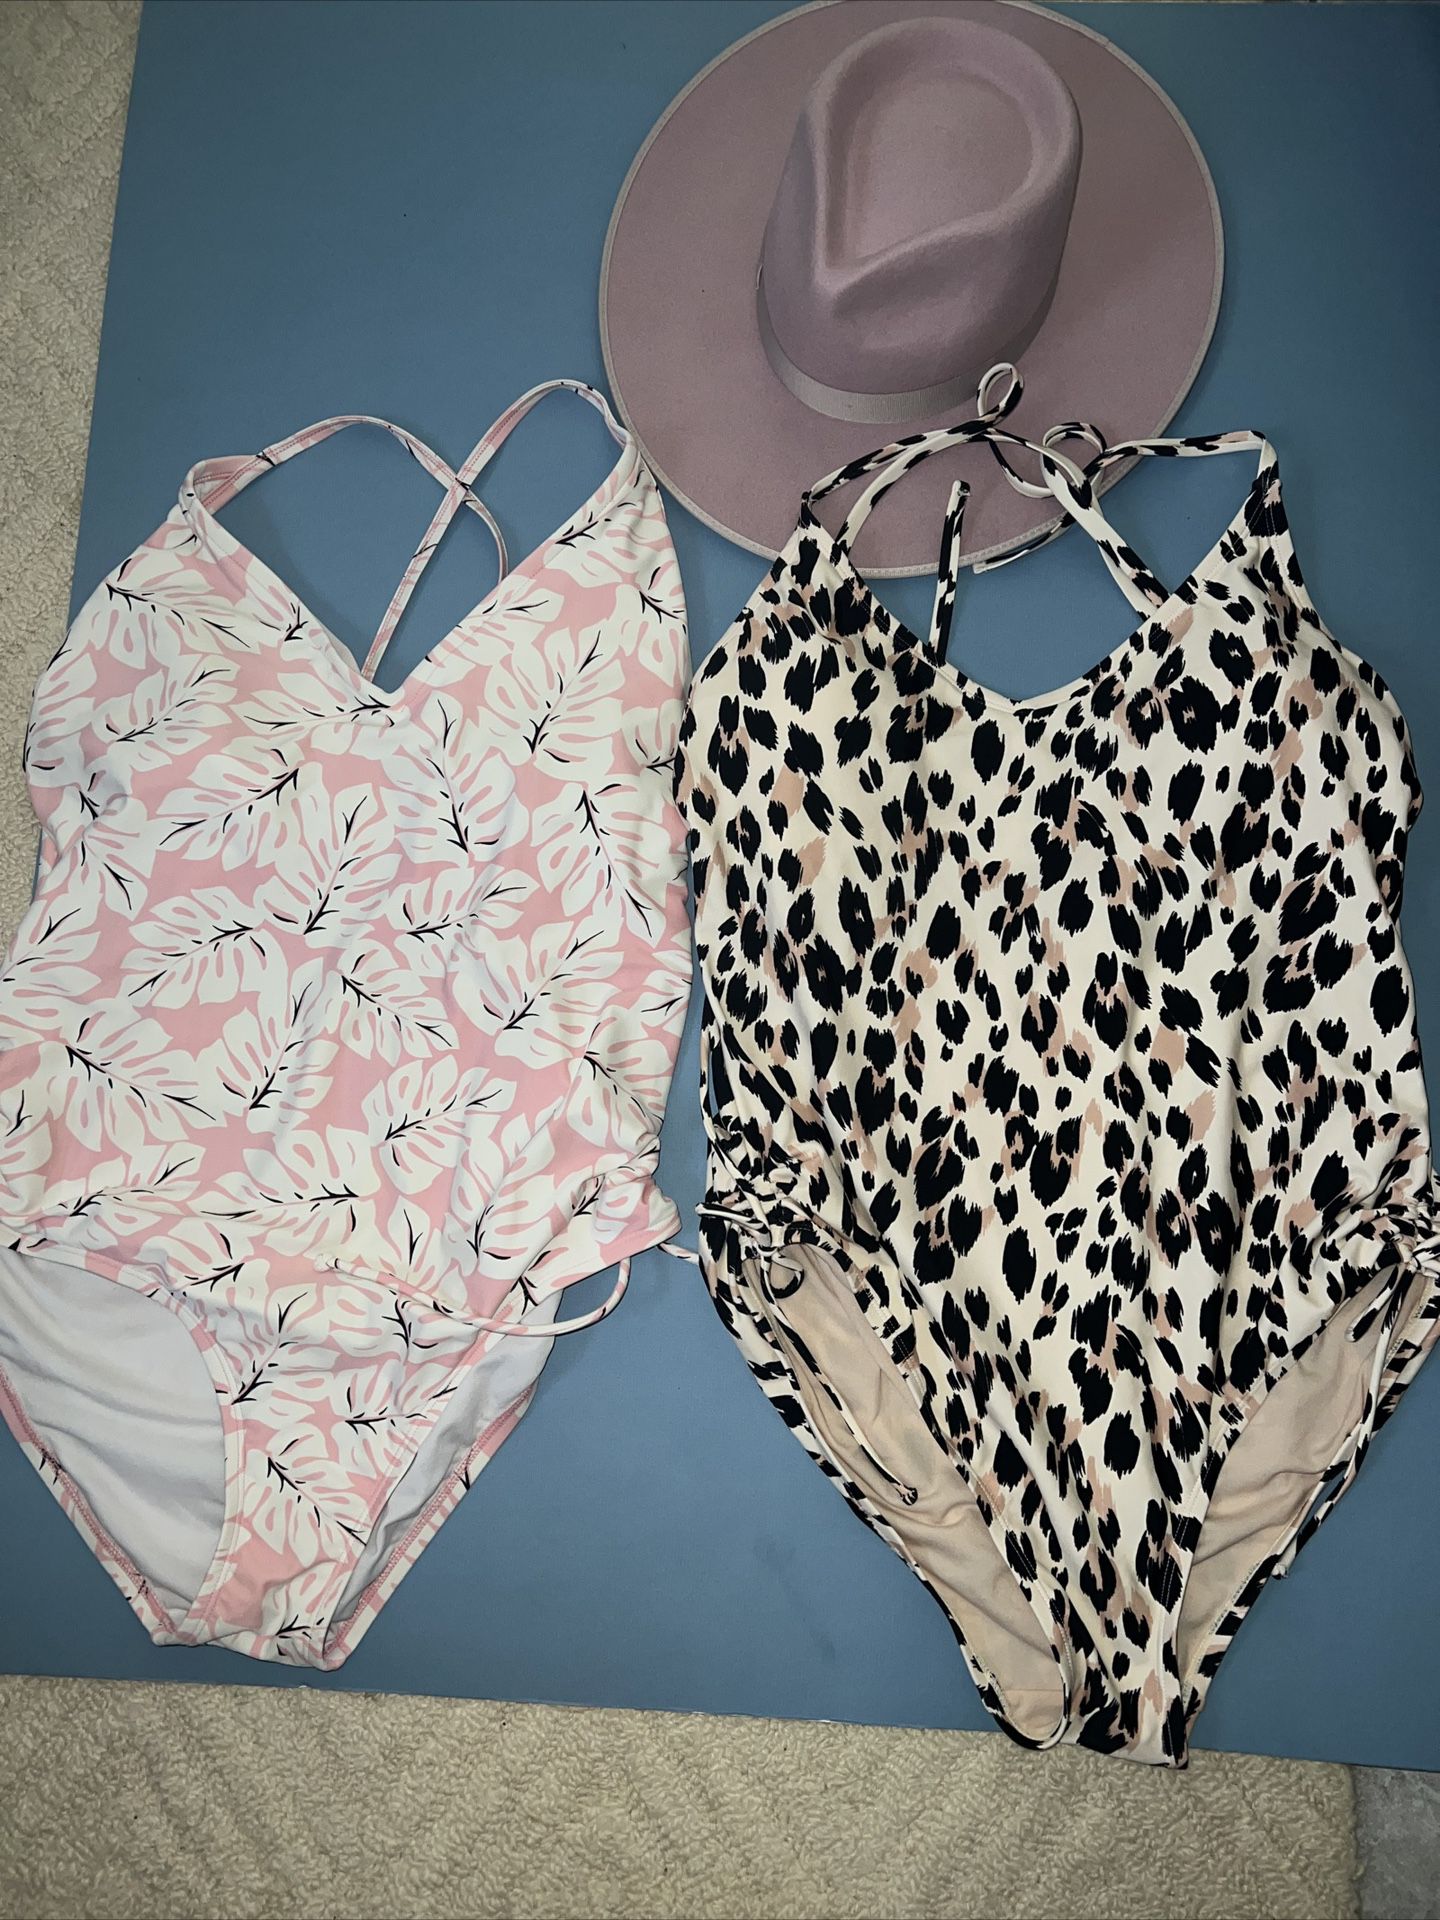 Kona Sol Woman’s One Pieces Xl Bathing Suits Animal Print And Monstera Plant Pink Boho